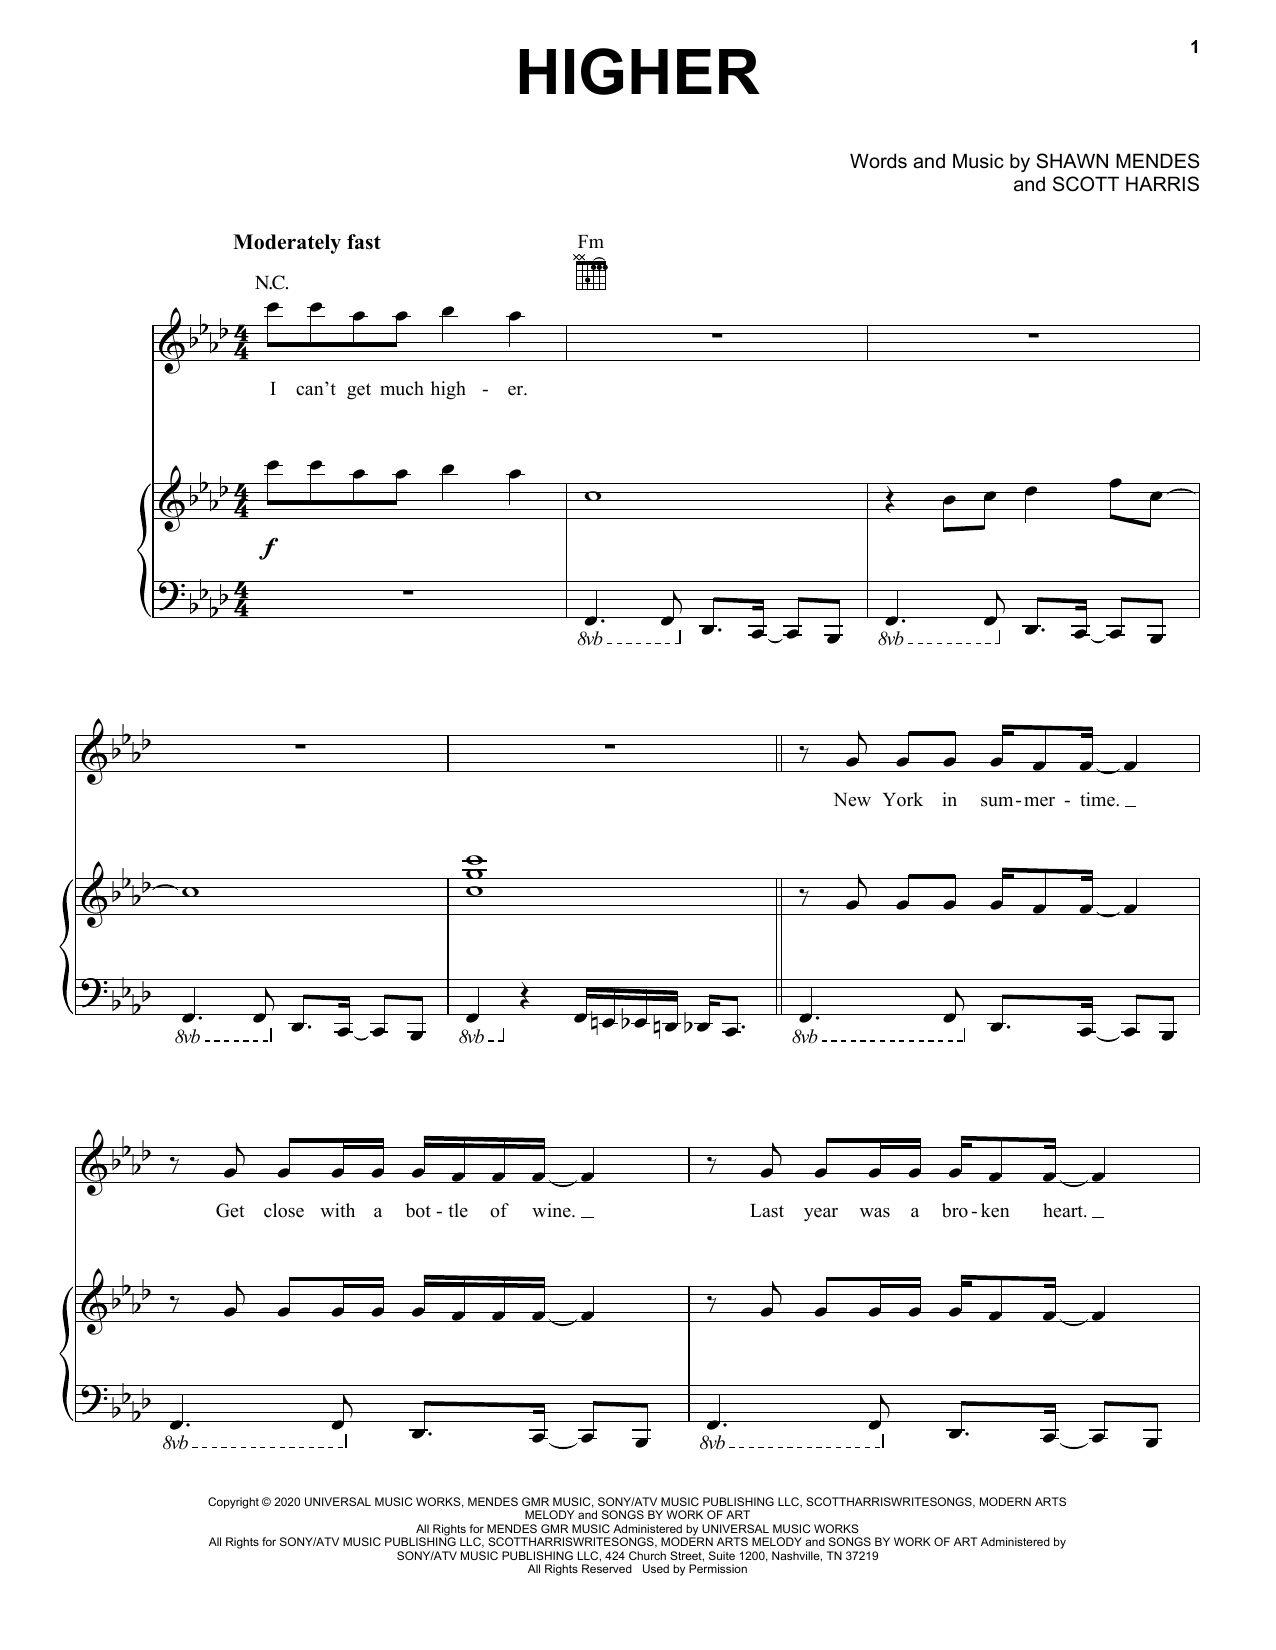 Download Shawn Mendes Higher Sheet Music